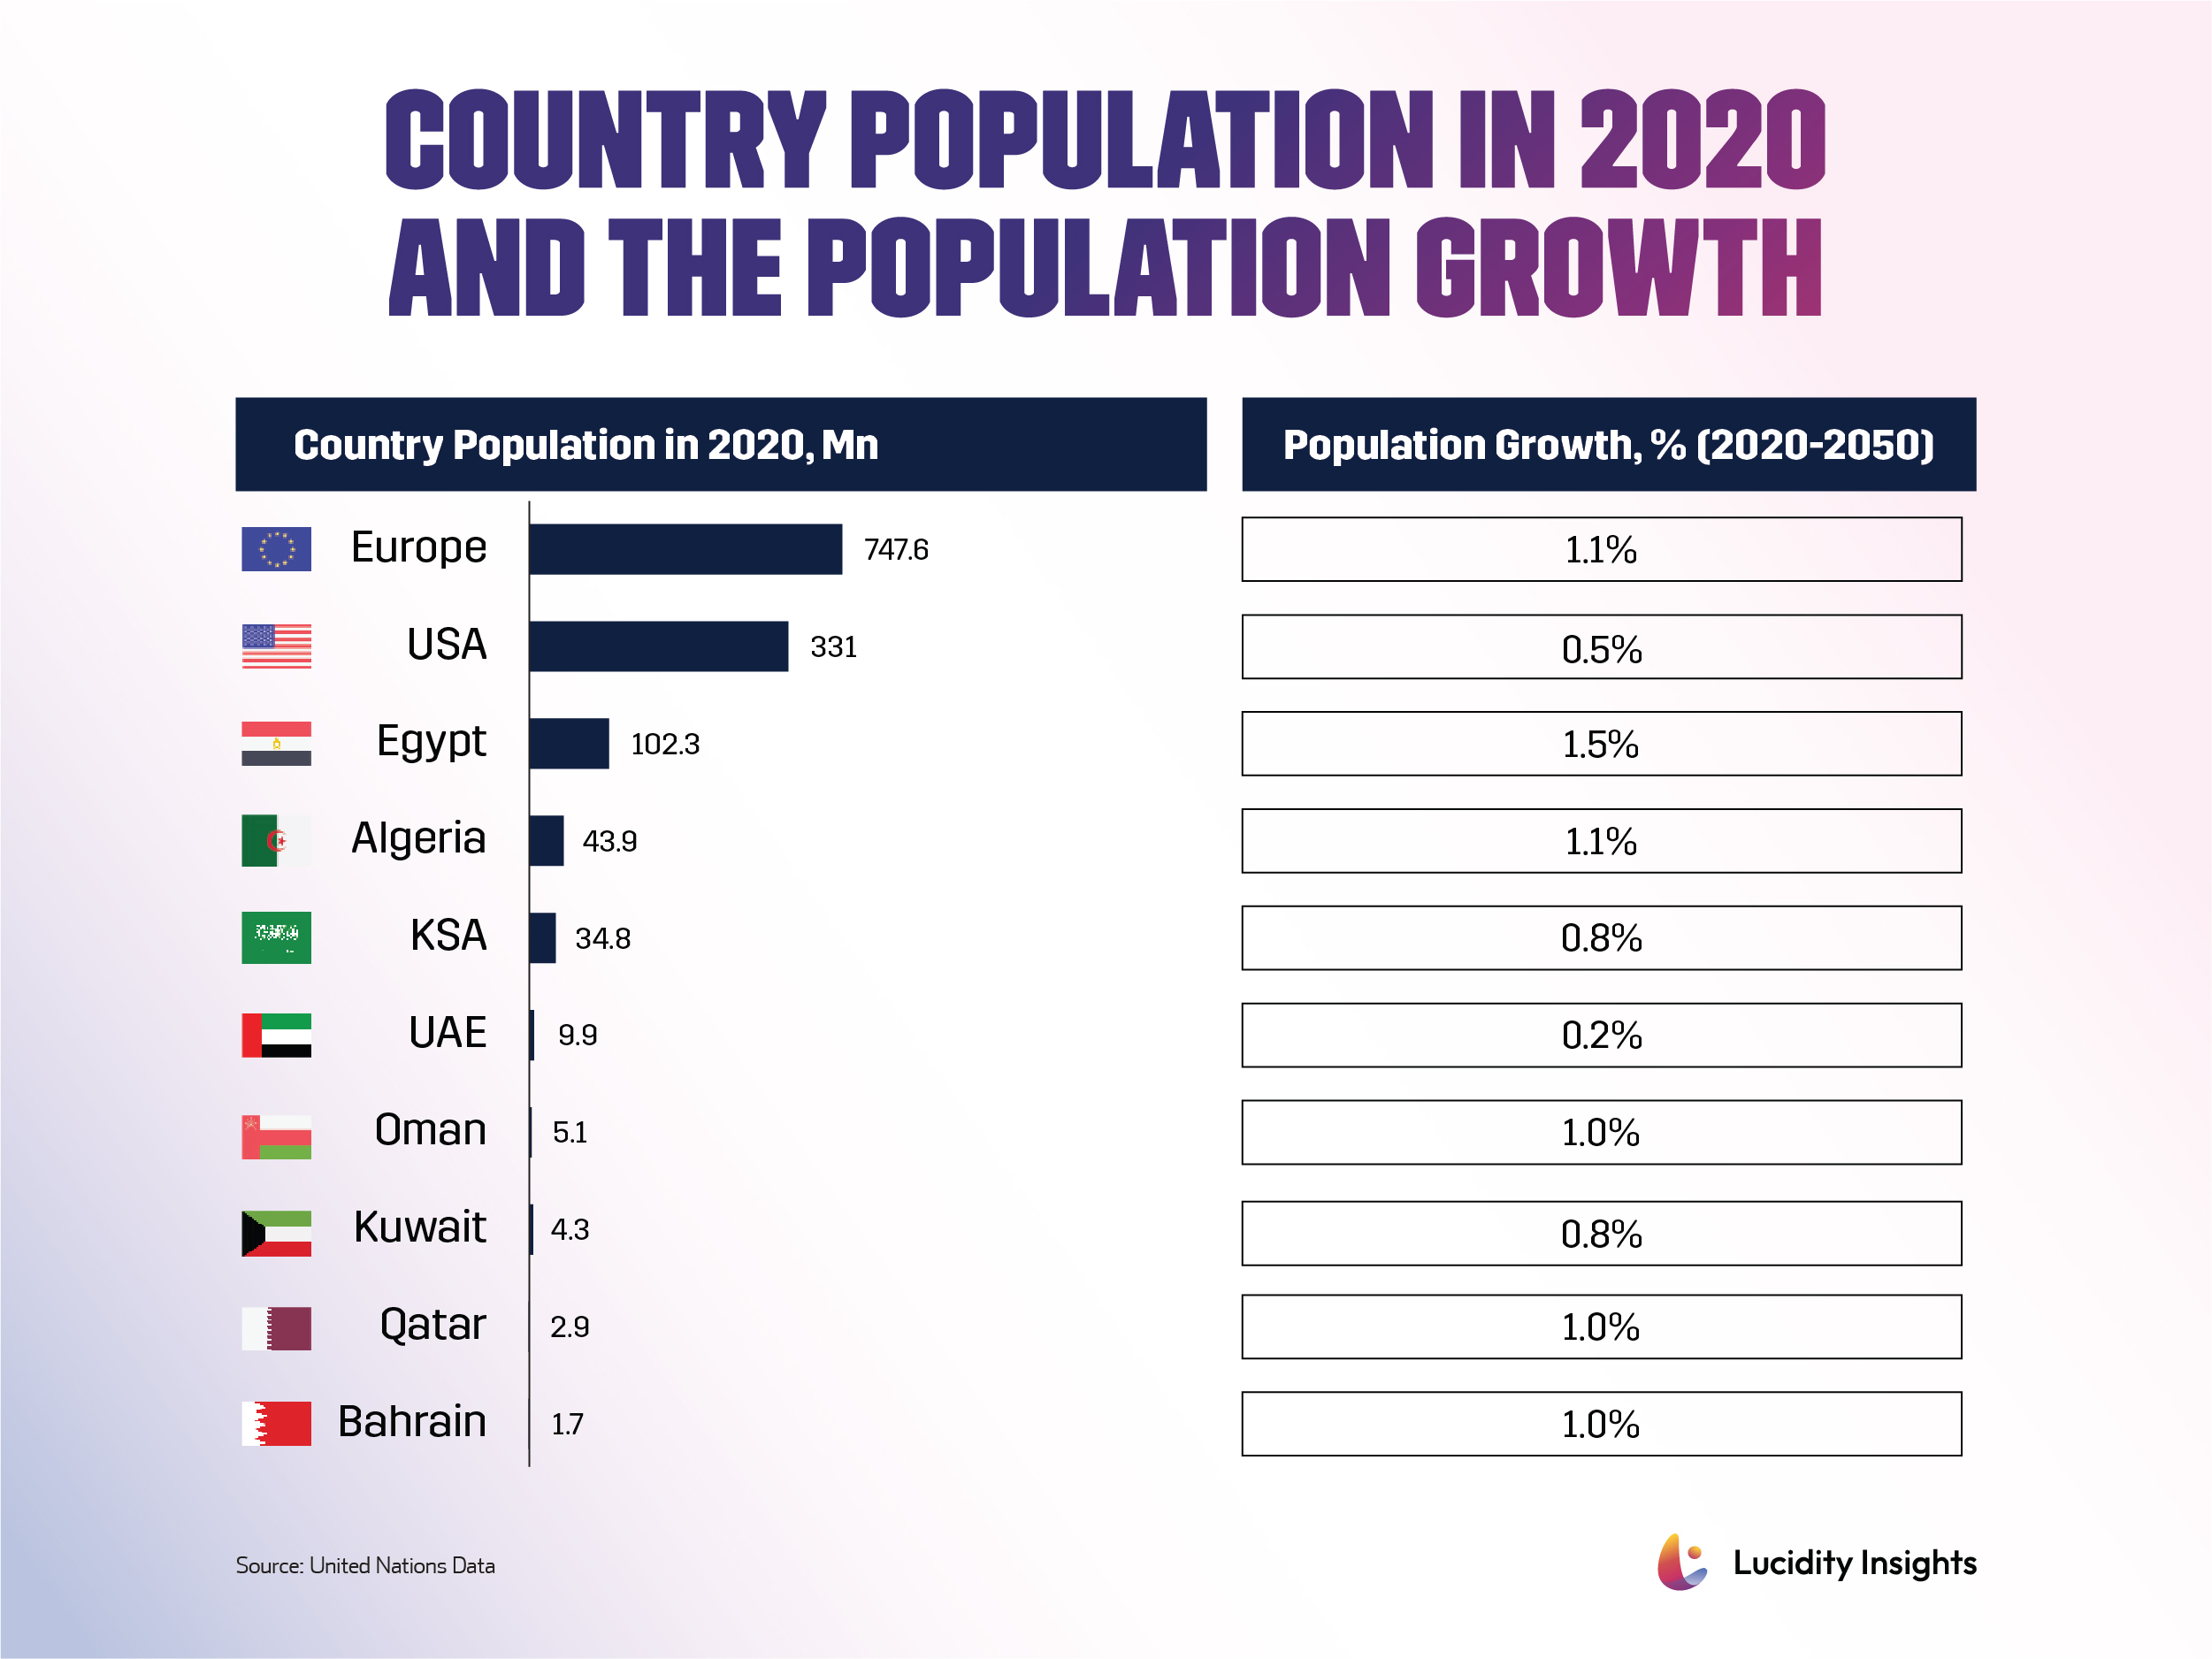 MENA Country Population in 2020 and 2050 Growth Projection